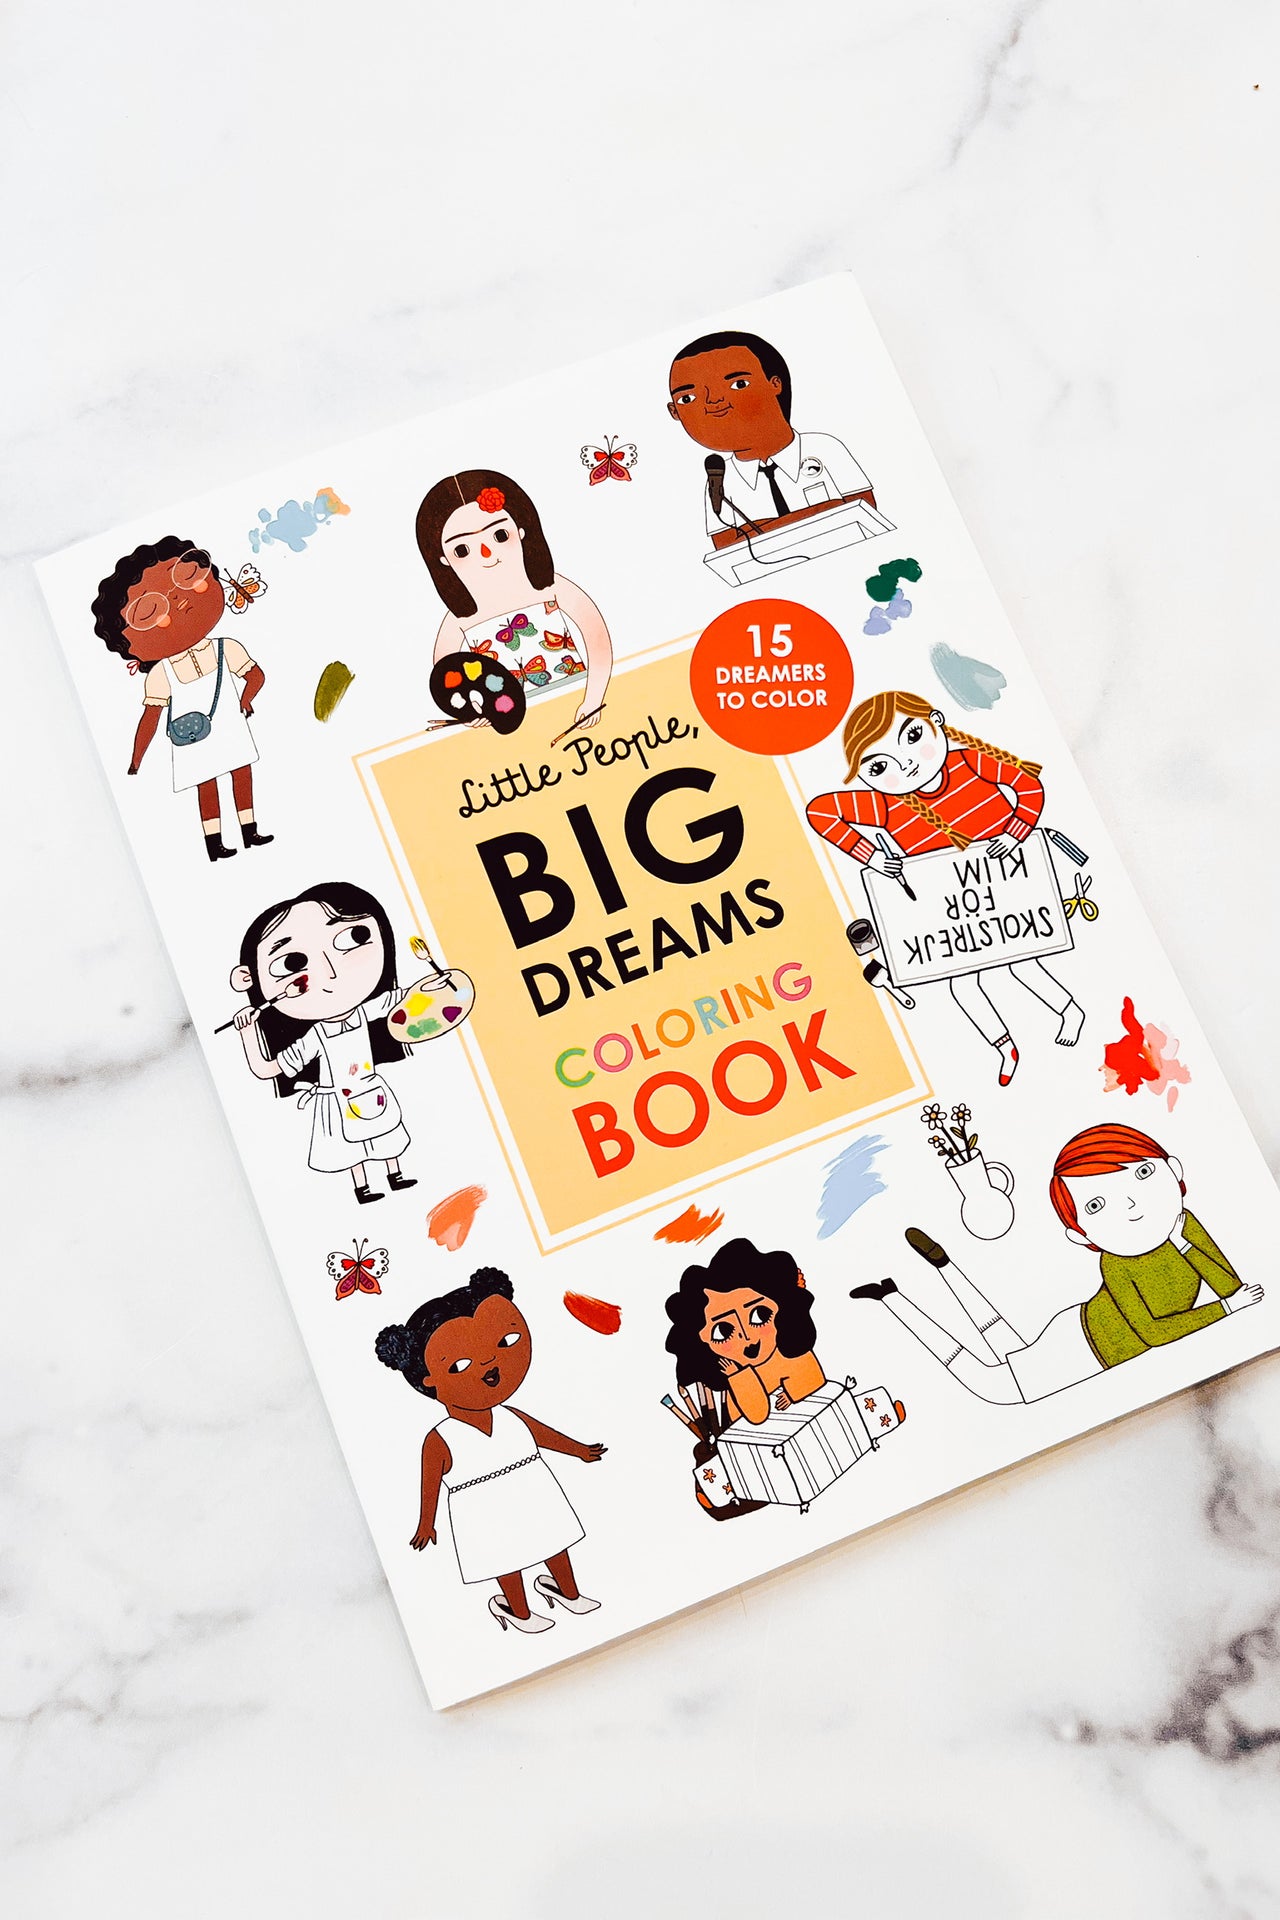 Little people big dreams coloring book bought beautifully artisan market